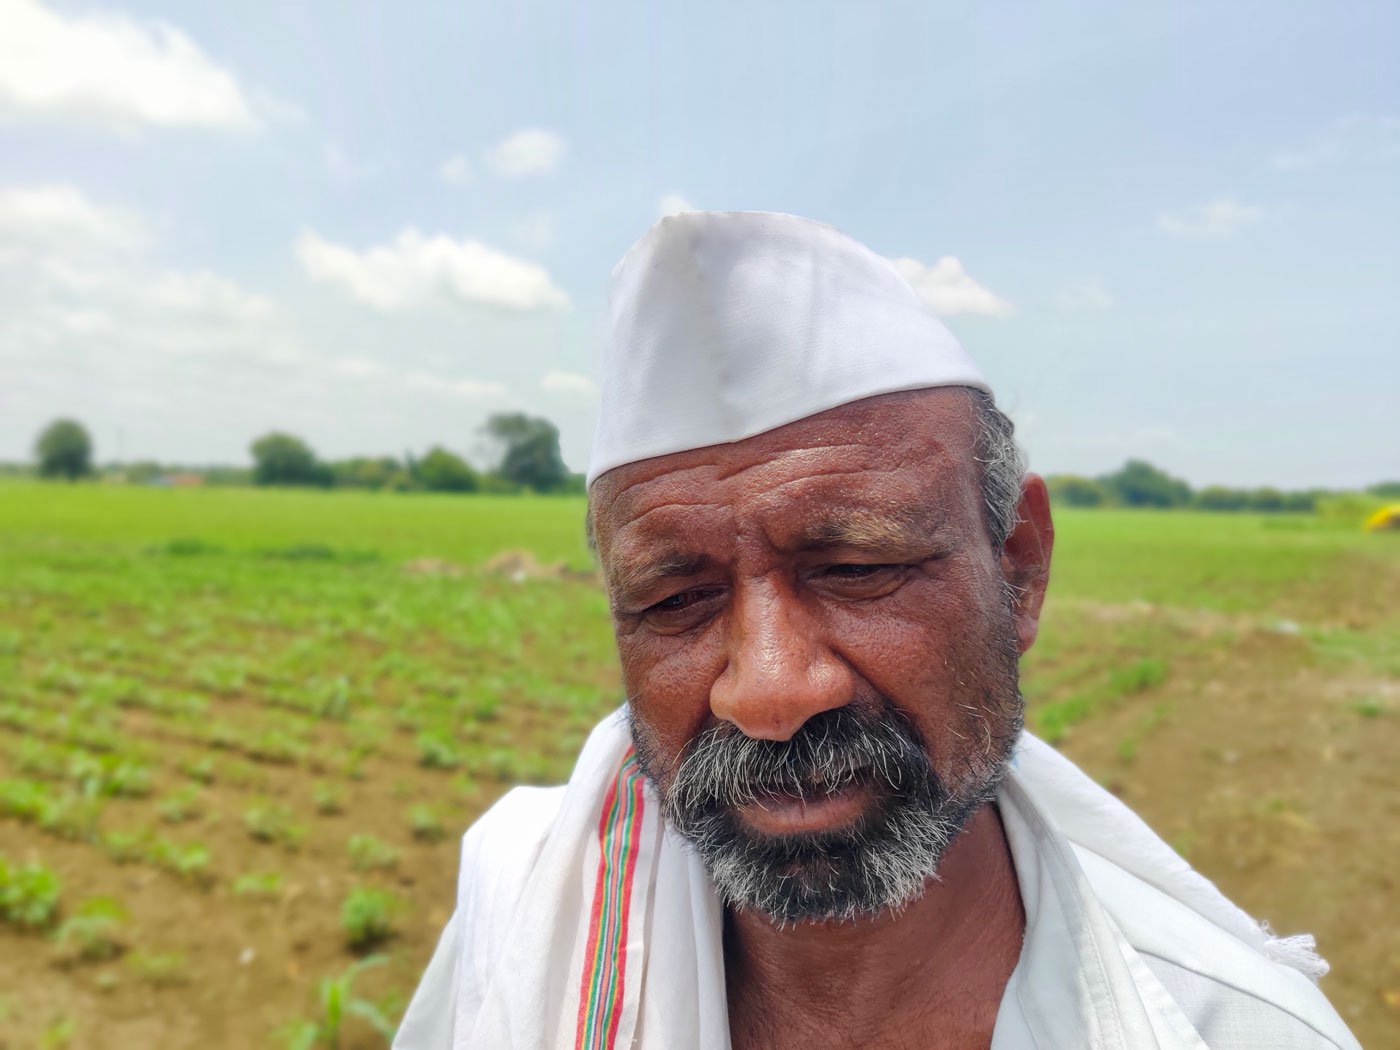 Bibhishan Wadkar in his farm in Wadgaon village. Crops insurance rules must favour the farmers, he says